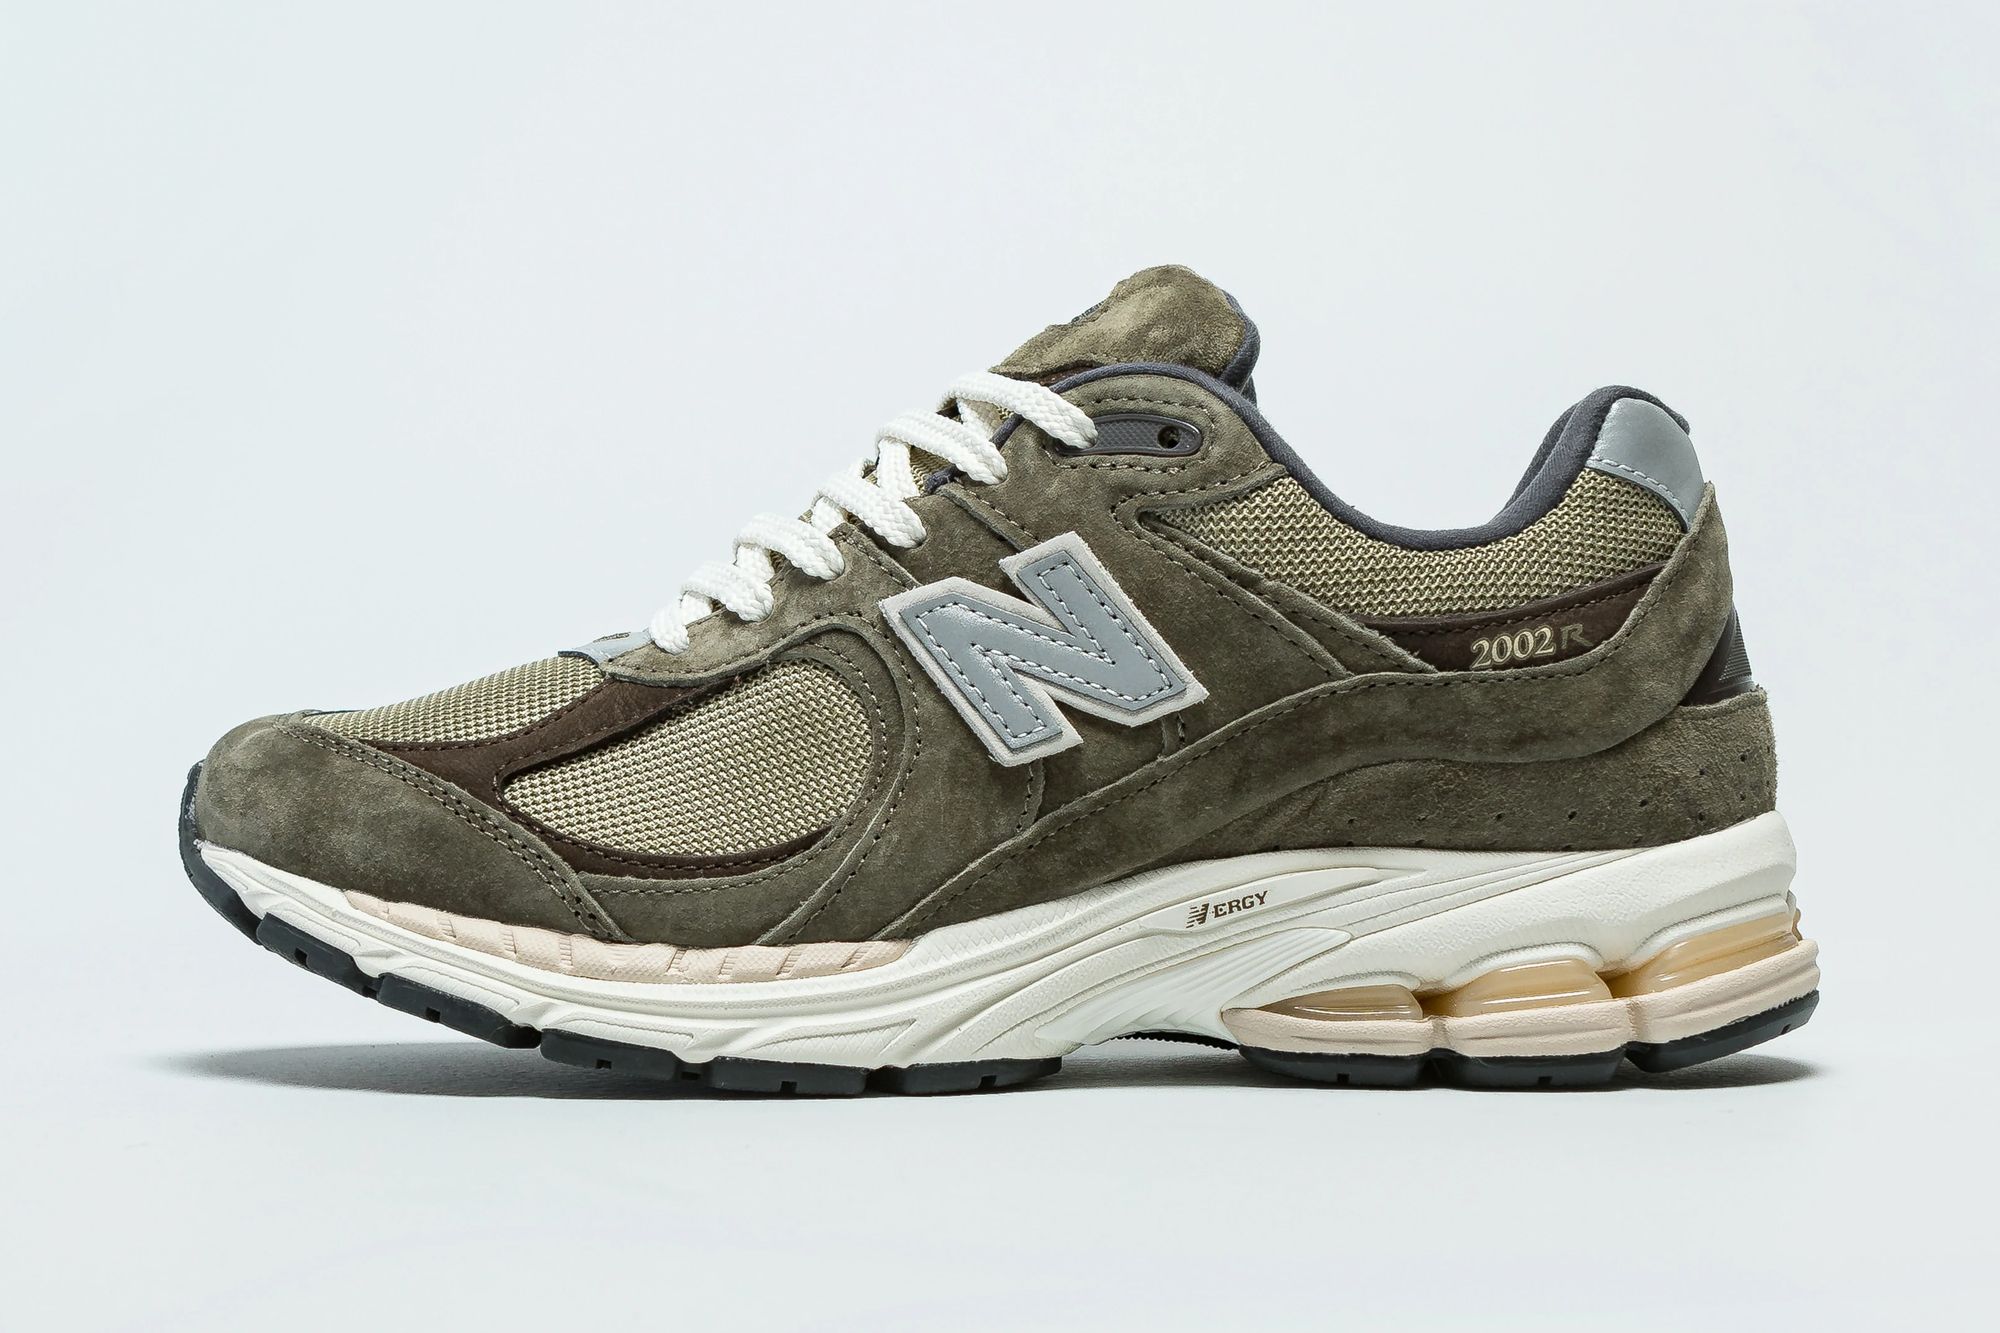 New Balance 2002R Olive Suede